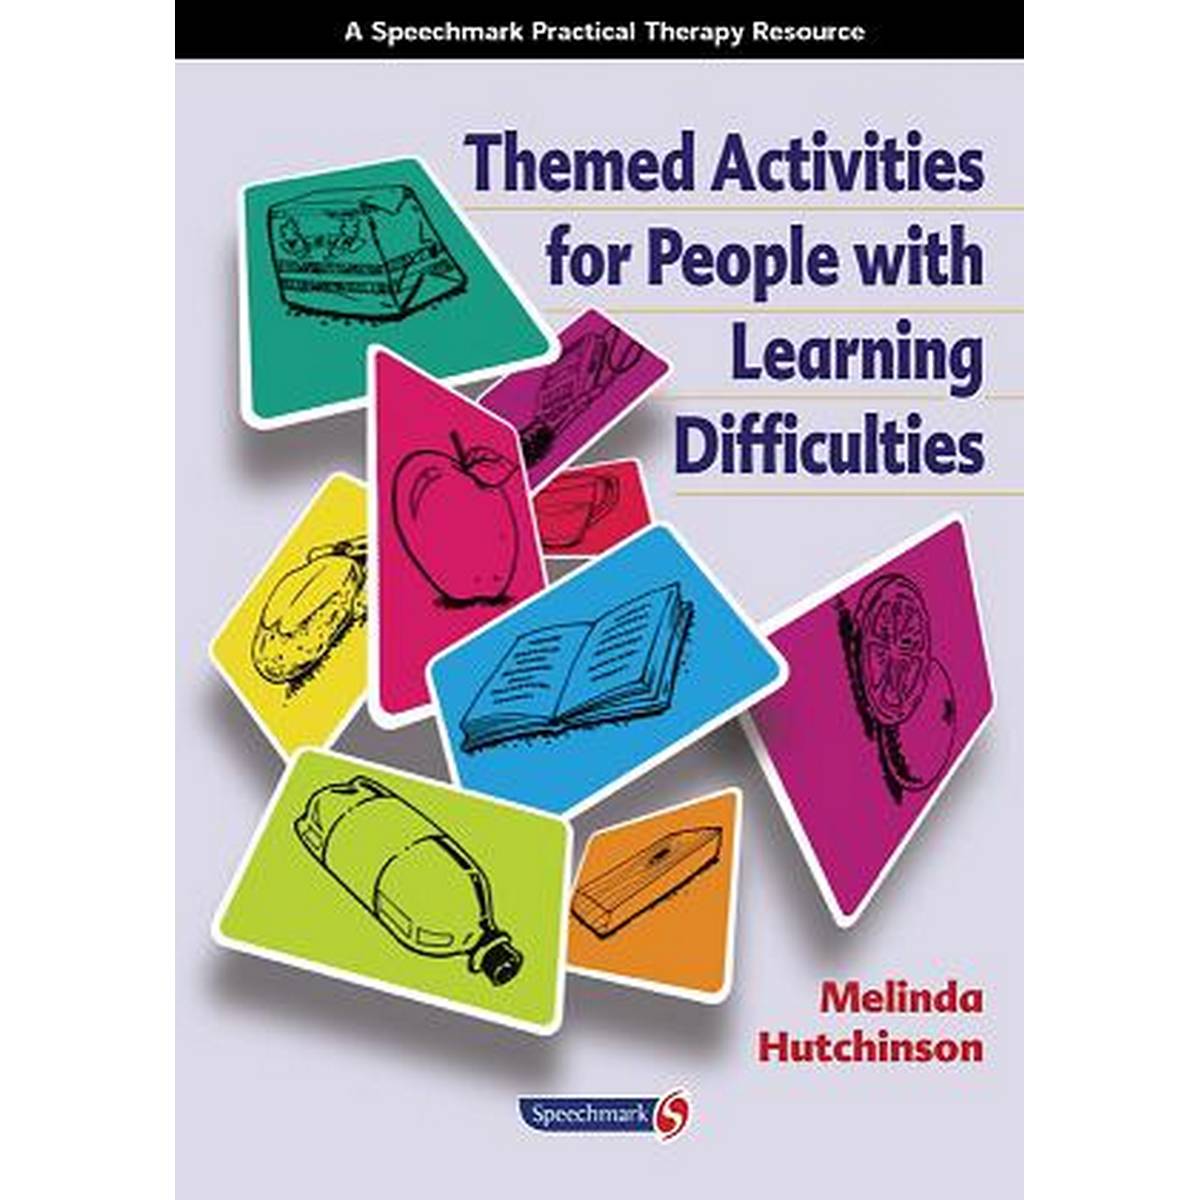 Themed Activities for People with Learning Difficulties